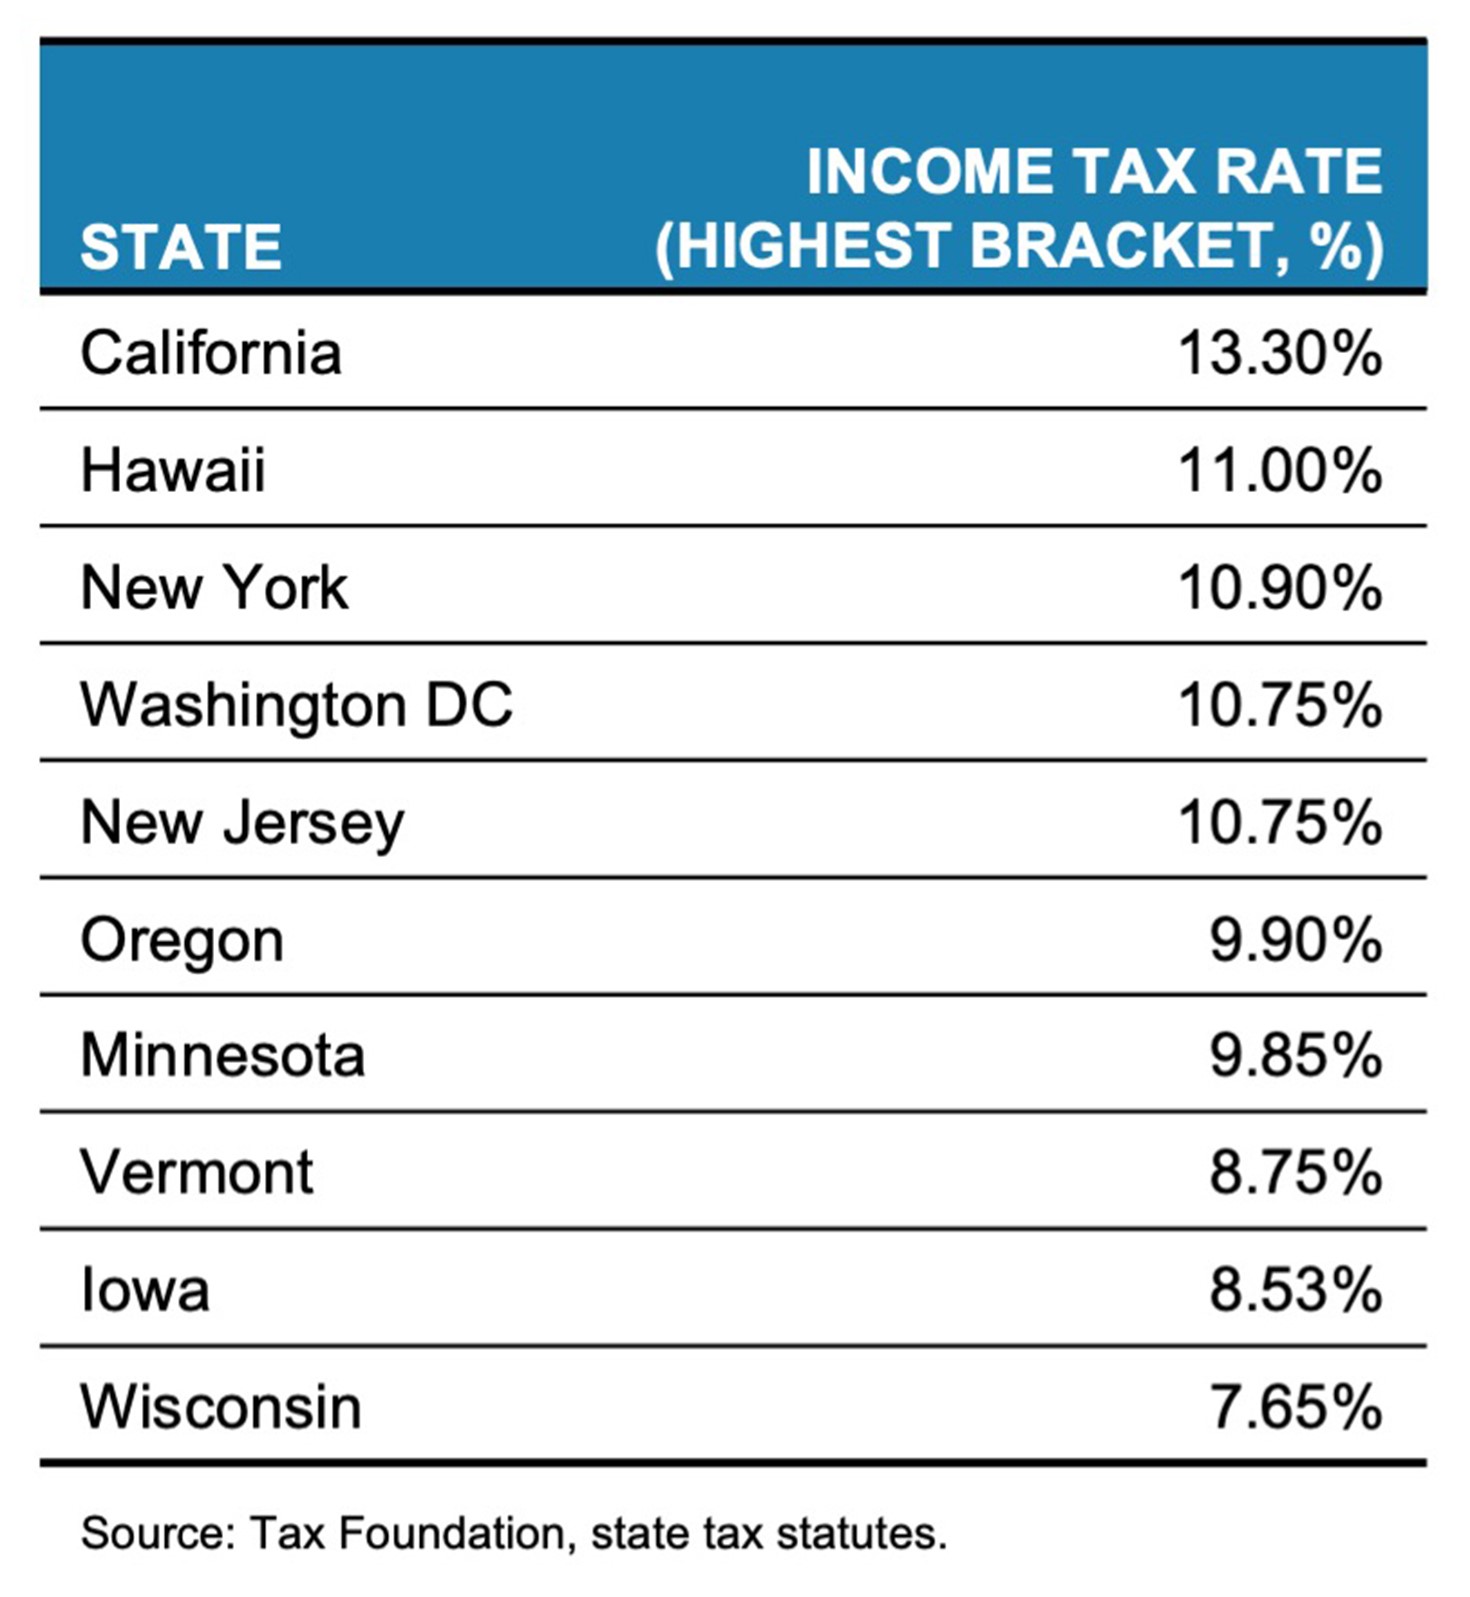 Highest state income tax rates